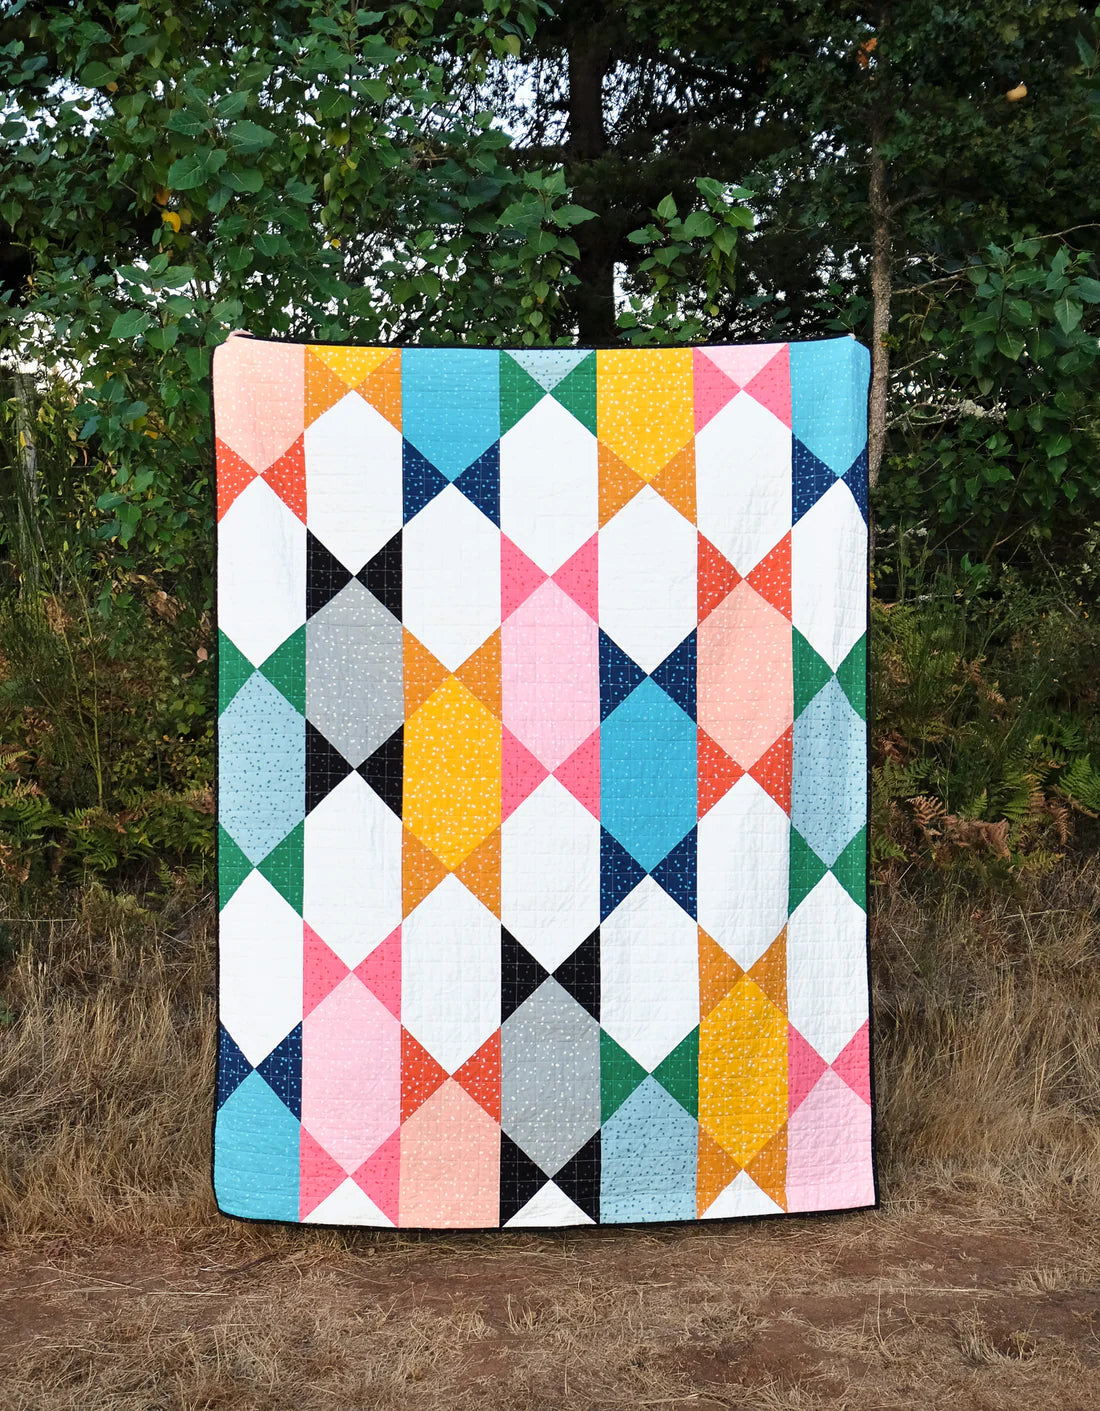 Kitchen Table Quilting - The Abigail Quilt Pattern